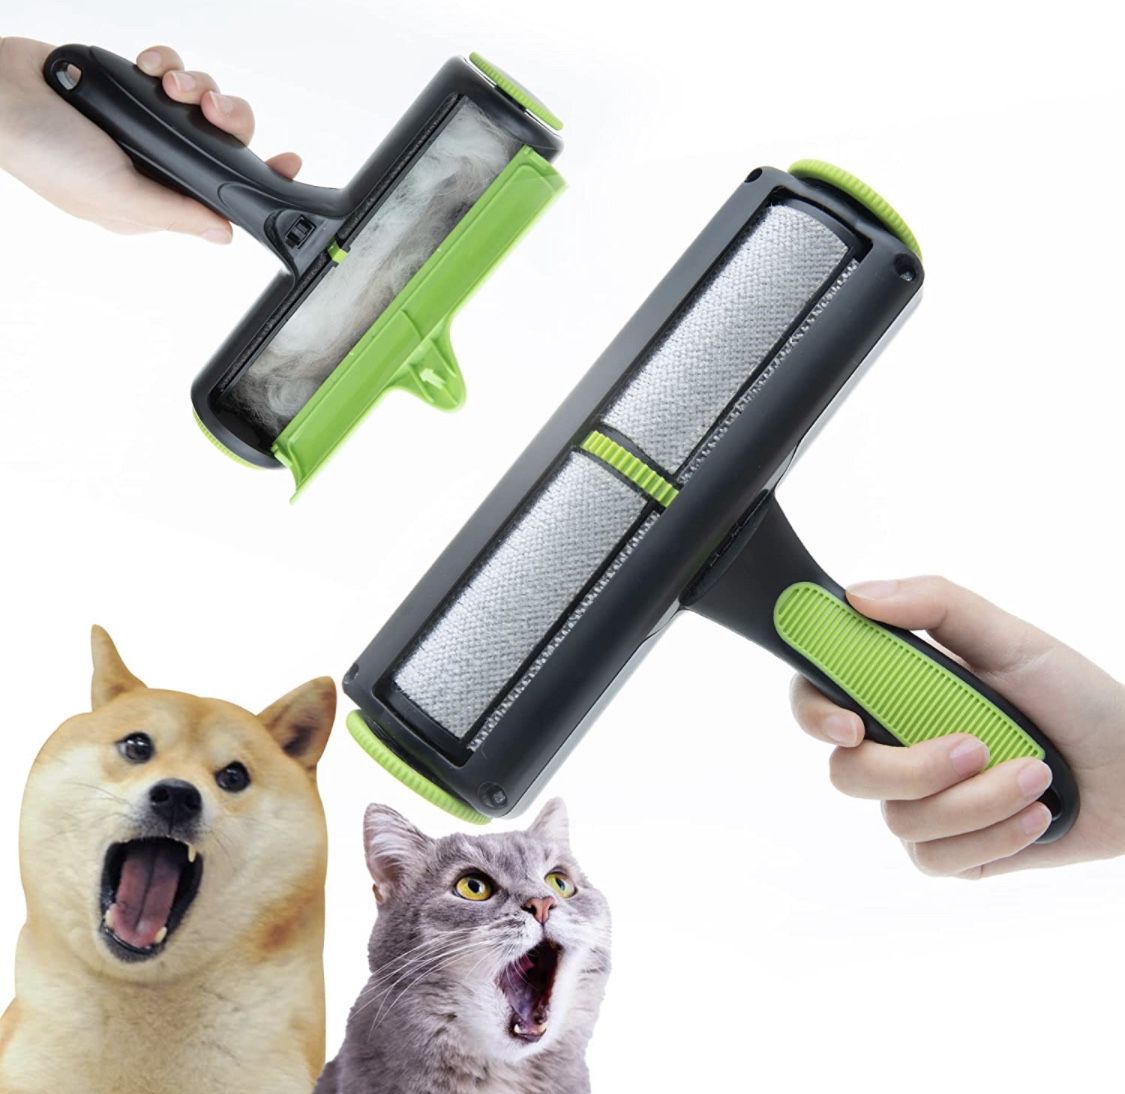 Brand new! Pet Hair Remover for Couch, Reusable Dog Cat Hair Remover Roller Brush for Clothes, Bedding, Non-Slip Handle Grip for Comfort Remove Experi